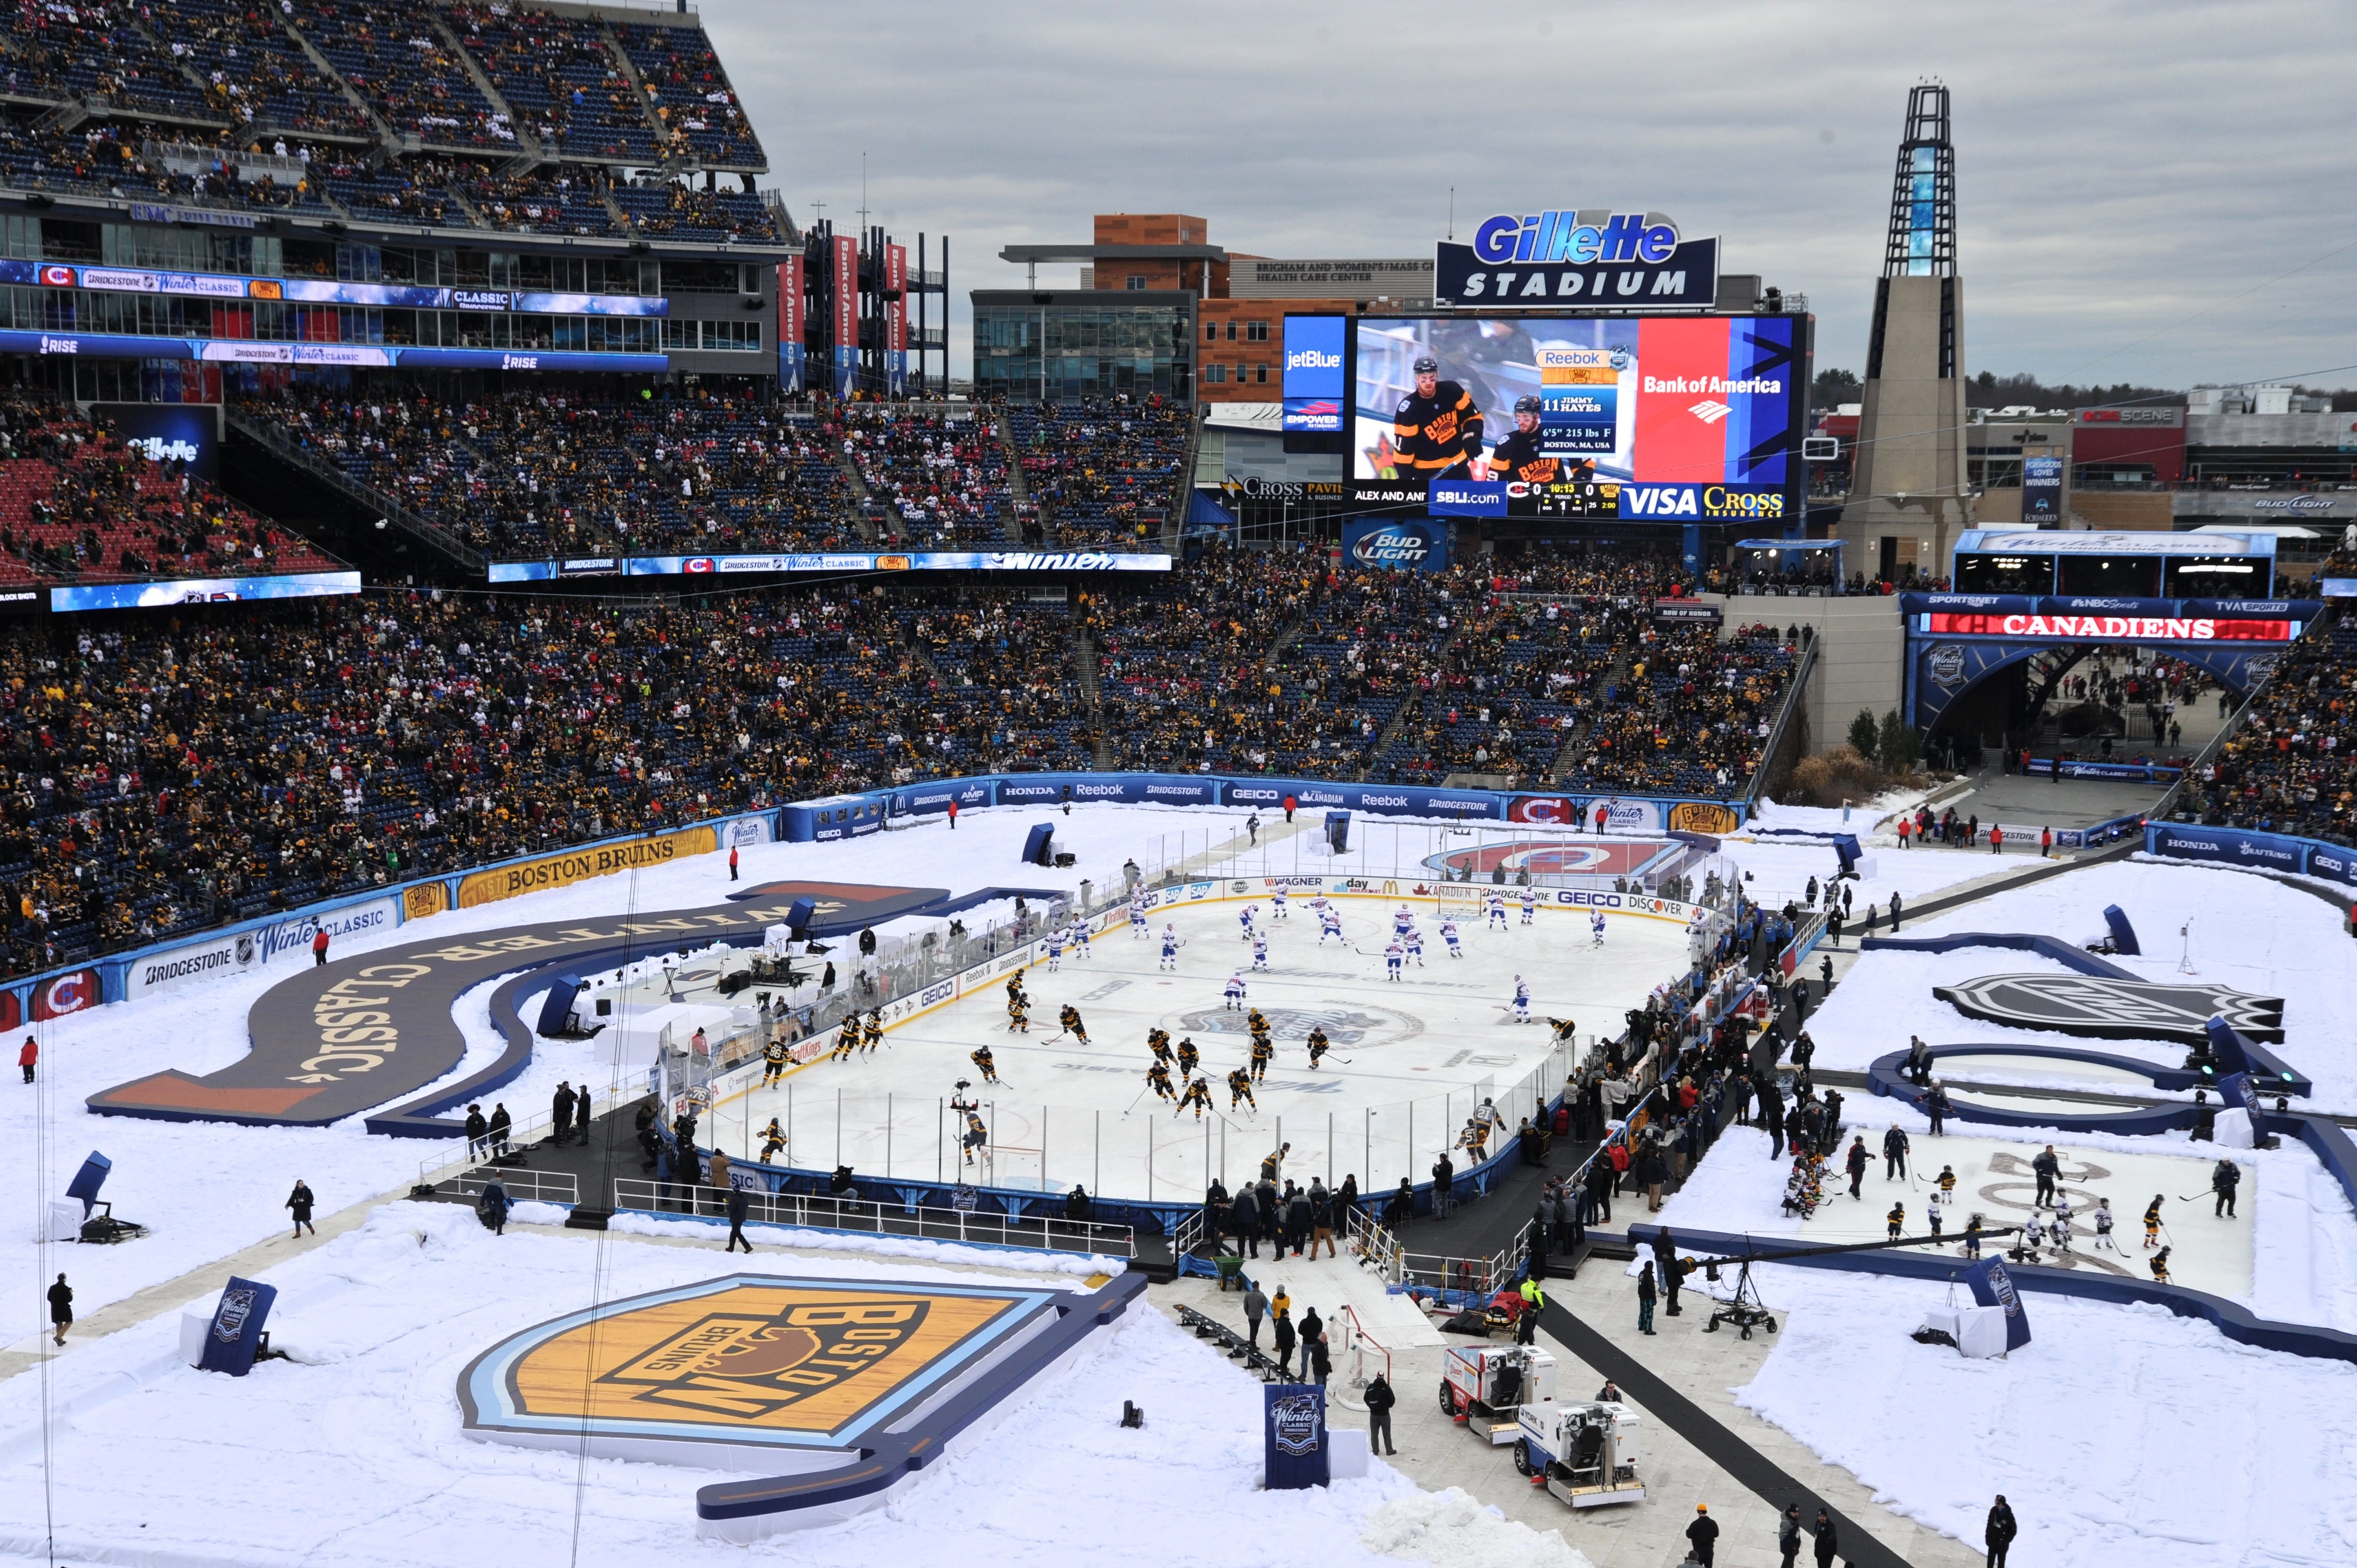 9 Winter Classic Must Haves for Boston Bruins Fans